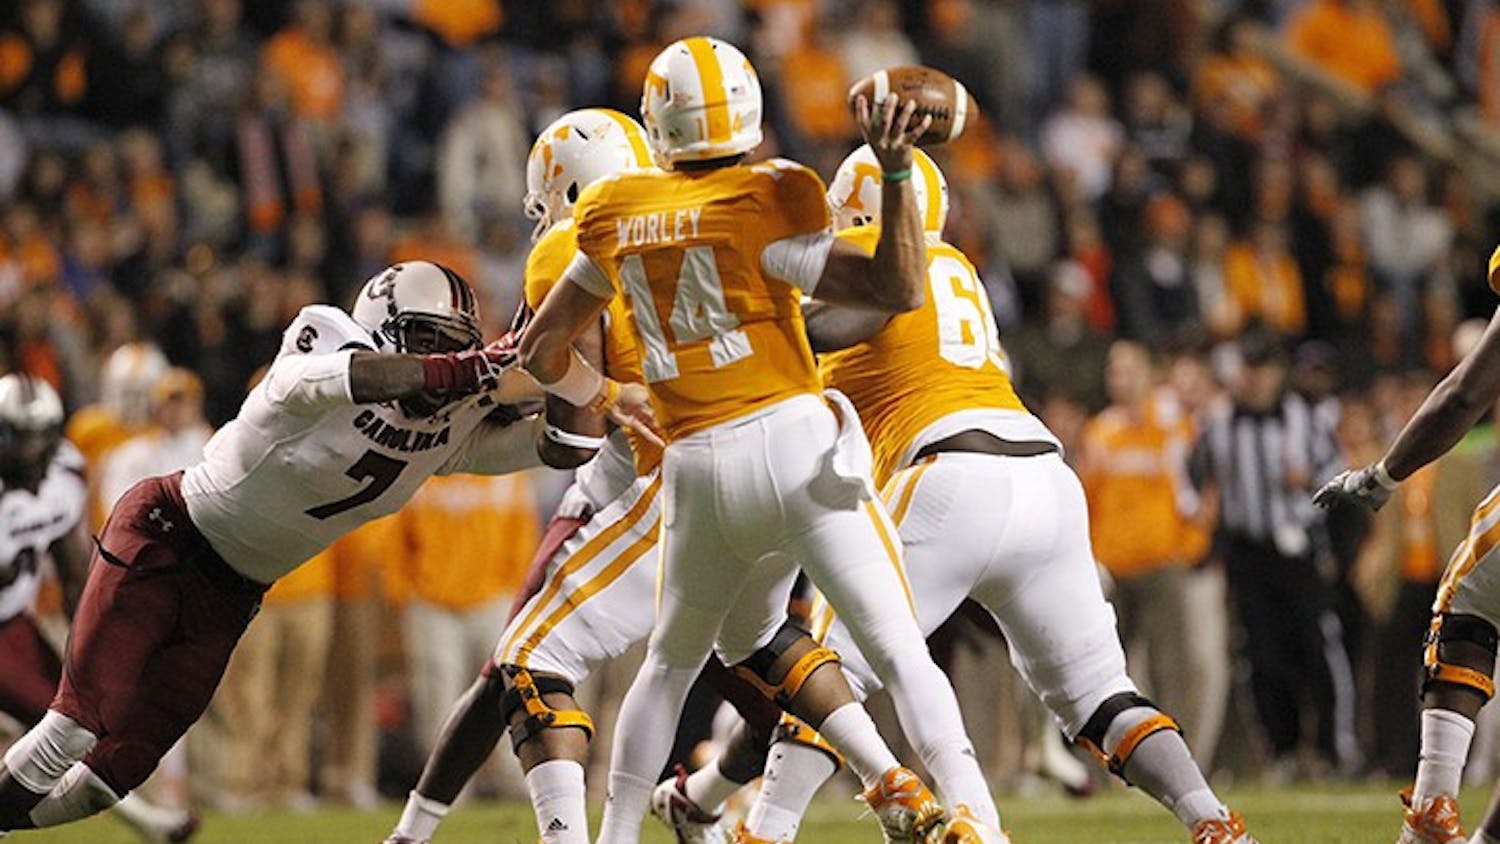 South Carolina defensive end Jadeveon Clowney (7) pressures Tennessee quarterback Justin Worley (14) during the first half on Saturday, October 29, 2011, at Neyland Stadium in Knoxville, Tennessee. (Tracy Glantz/The State/MCT)